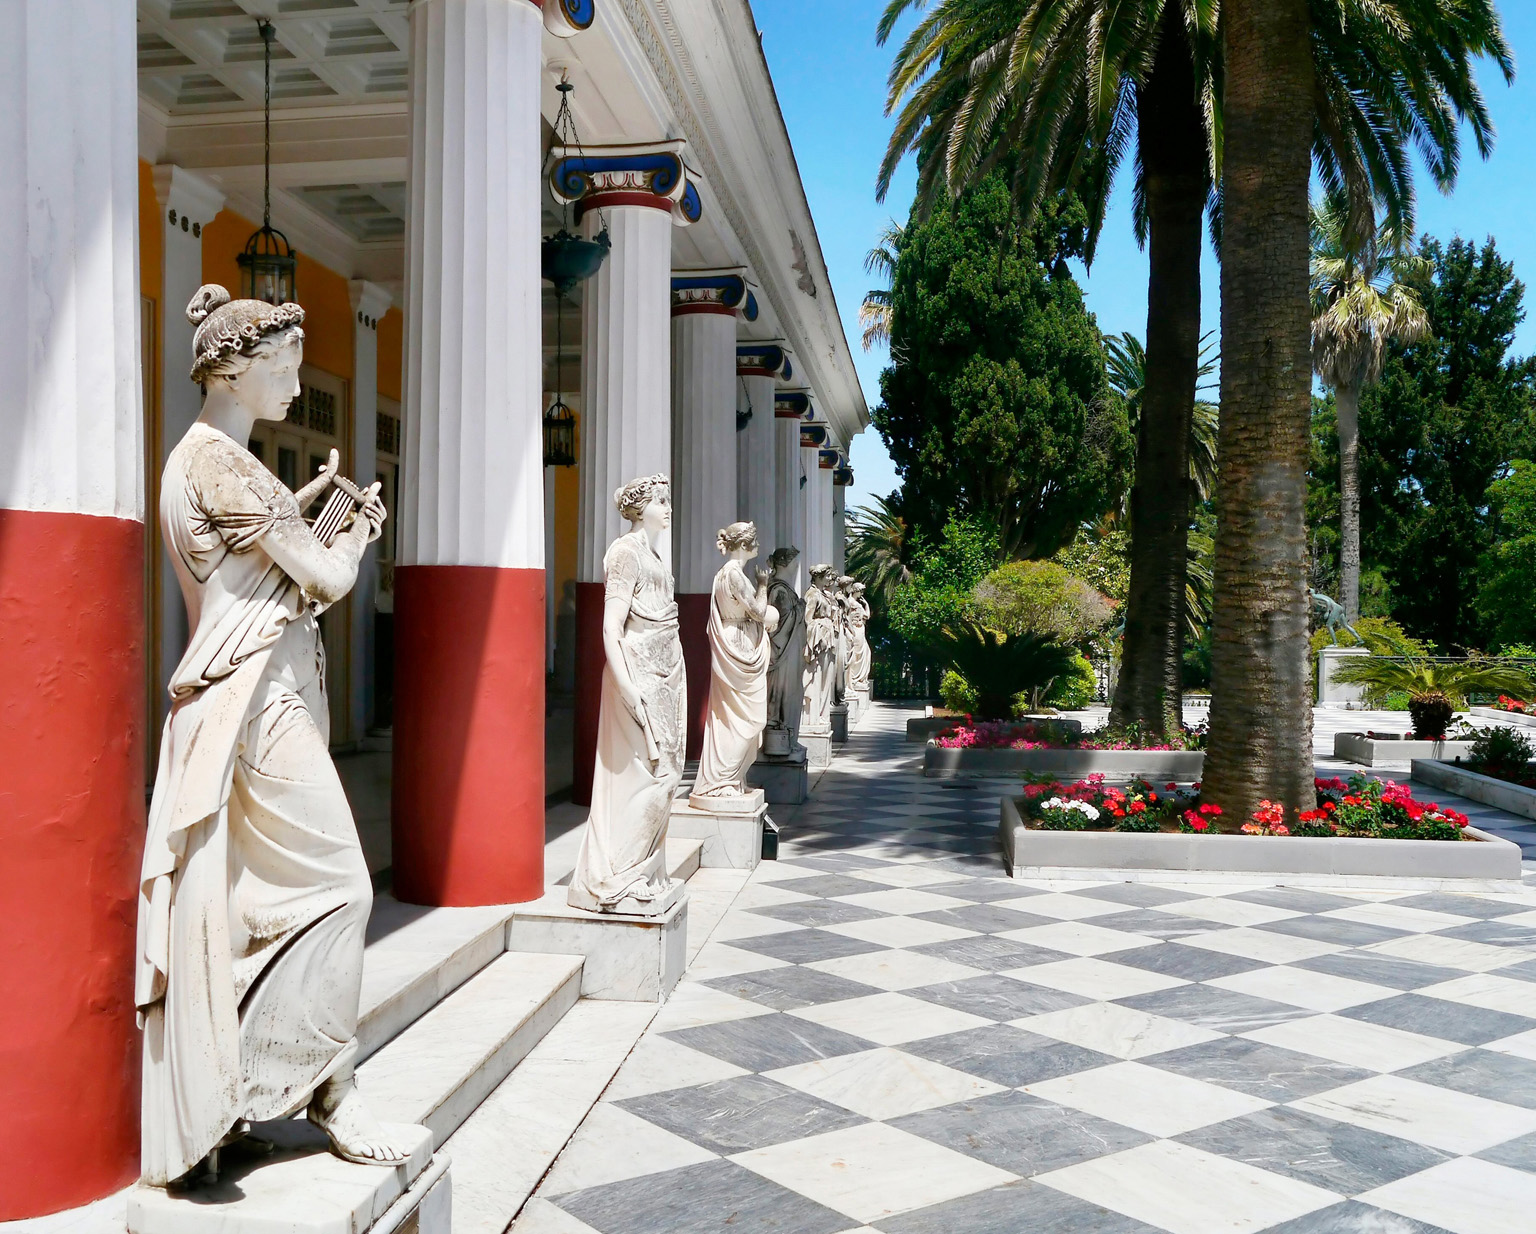 The Achlleion Palace on Corfu where statues of Greek gods take centre stage - photo 4